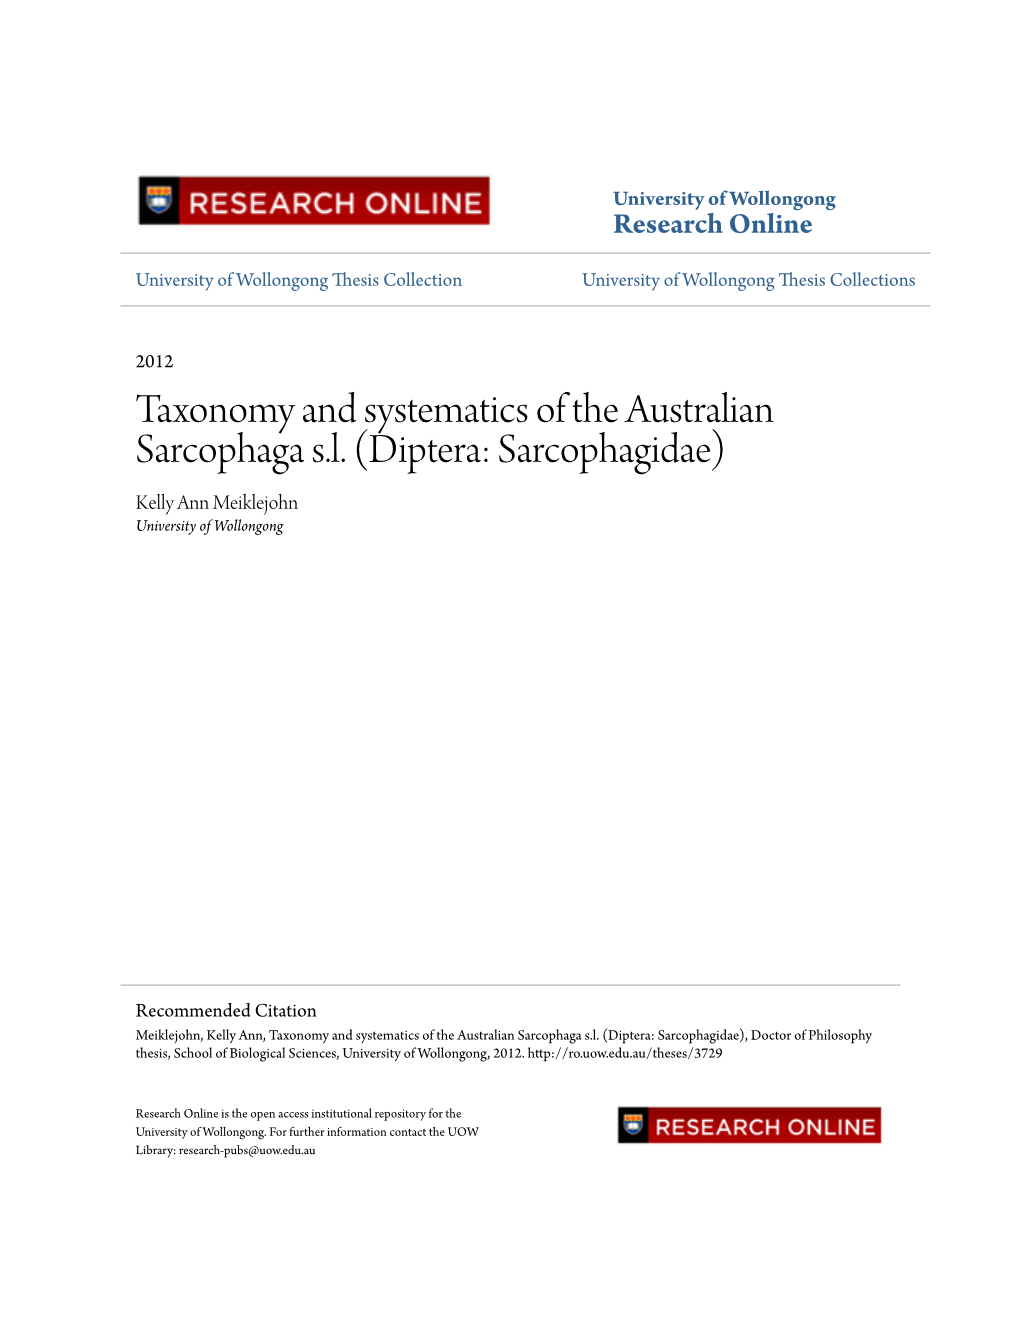 Taxonomy and Systematics of the Australian Sarcophaga S.L. (Diptera: Sarcophagidae) Kelly Ann Meiklejohn University of Wollongong